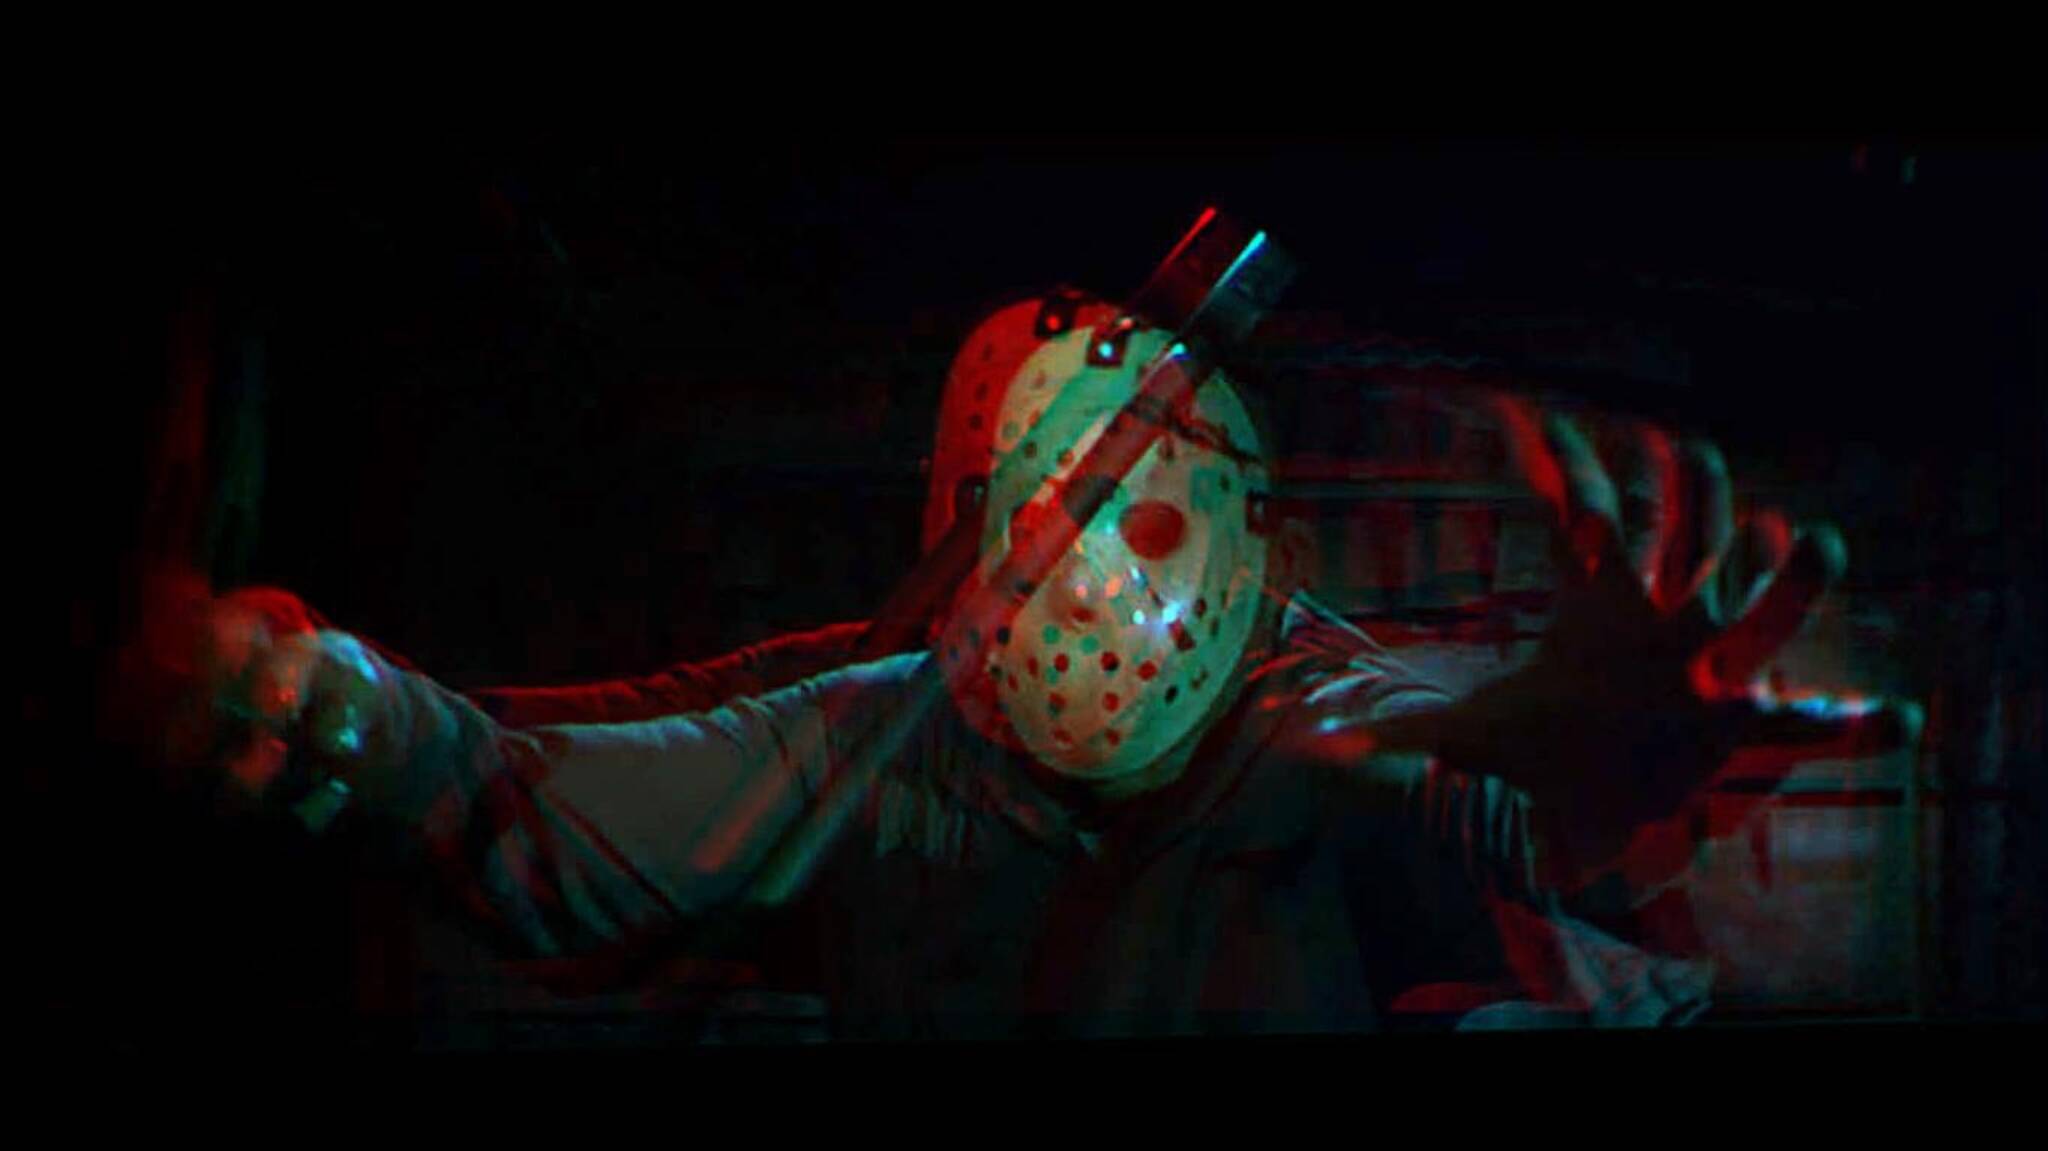 LowLife Cinema: Friday the 13th Part 3 in 3D